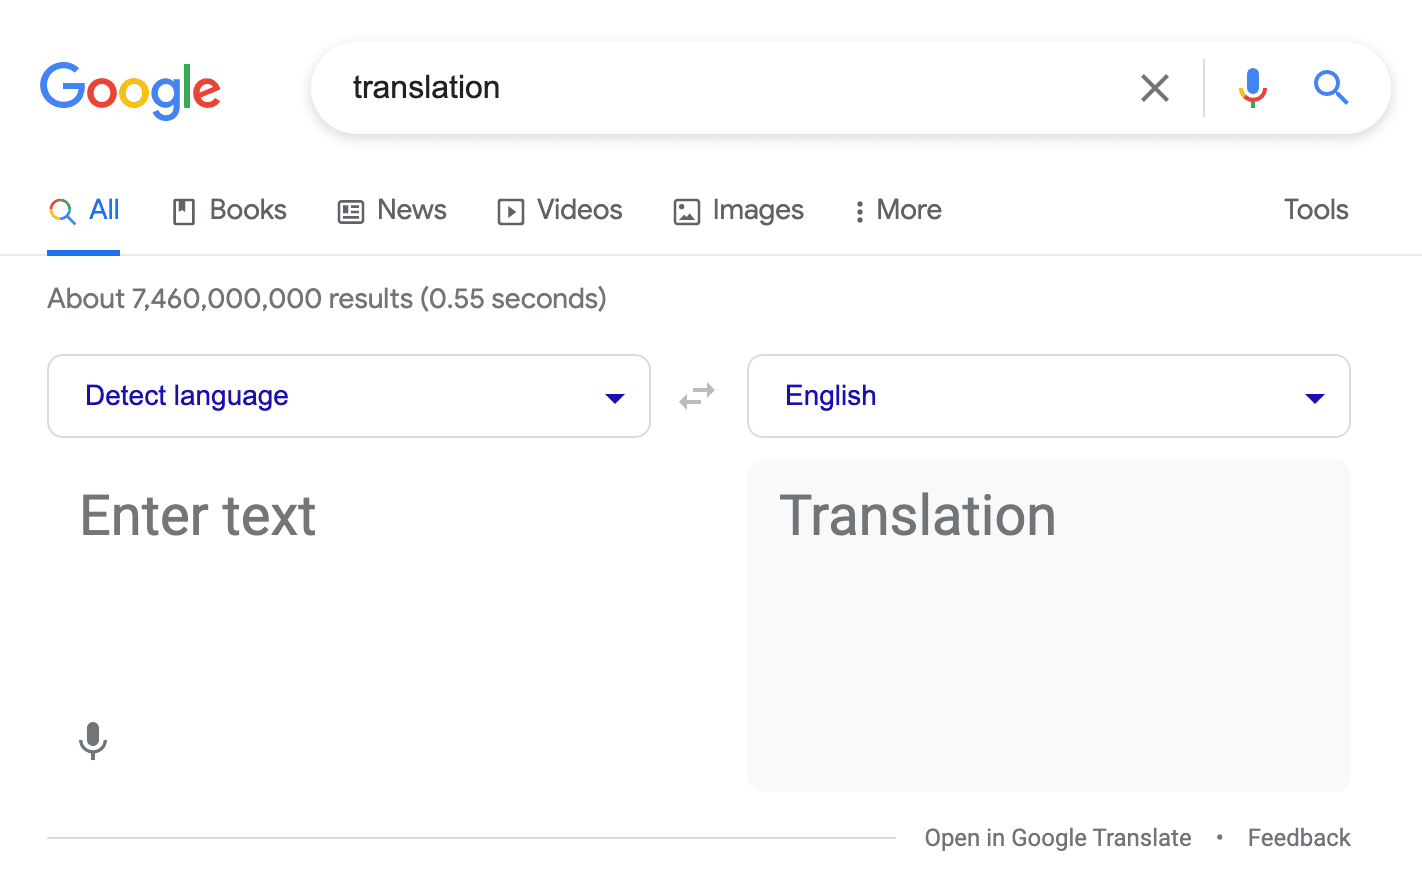 Google displays a Google Translation insert for the query "translation".